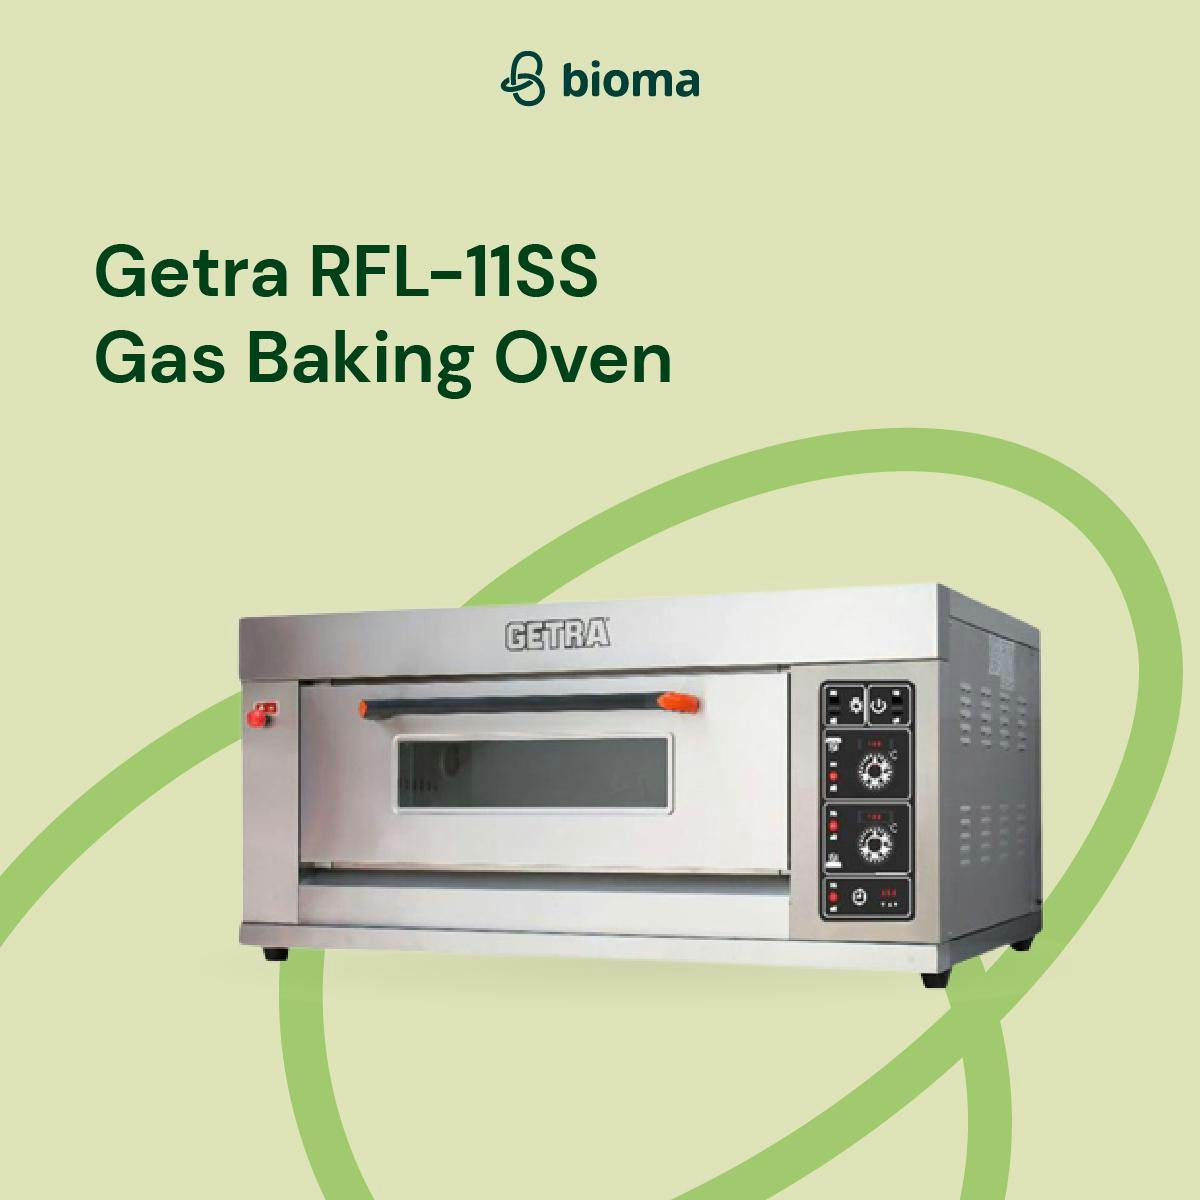 Getra RFL-11SS Gas Baking Oven